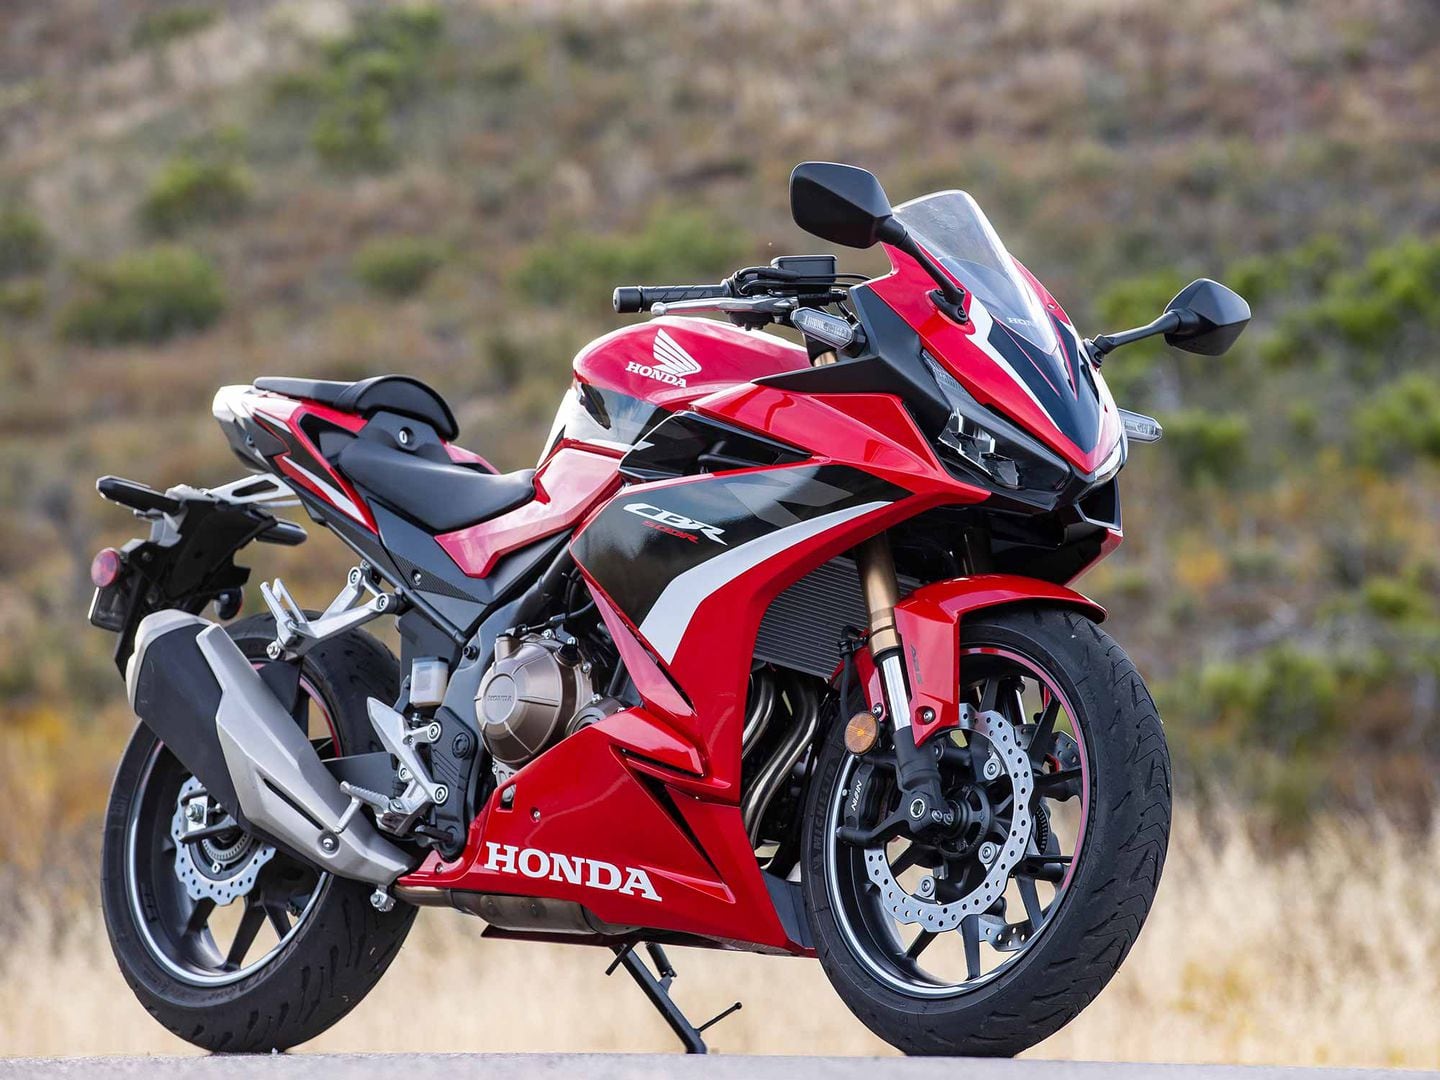 2022 Honda CBR500R ABS & CB500F ABS Ride Review | Cycle World